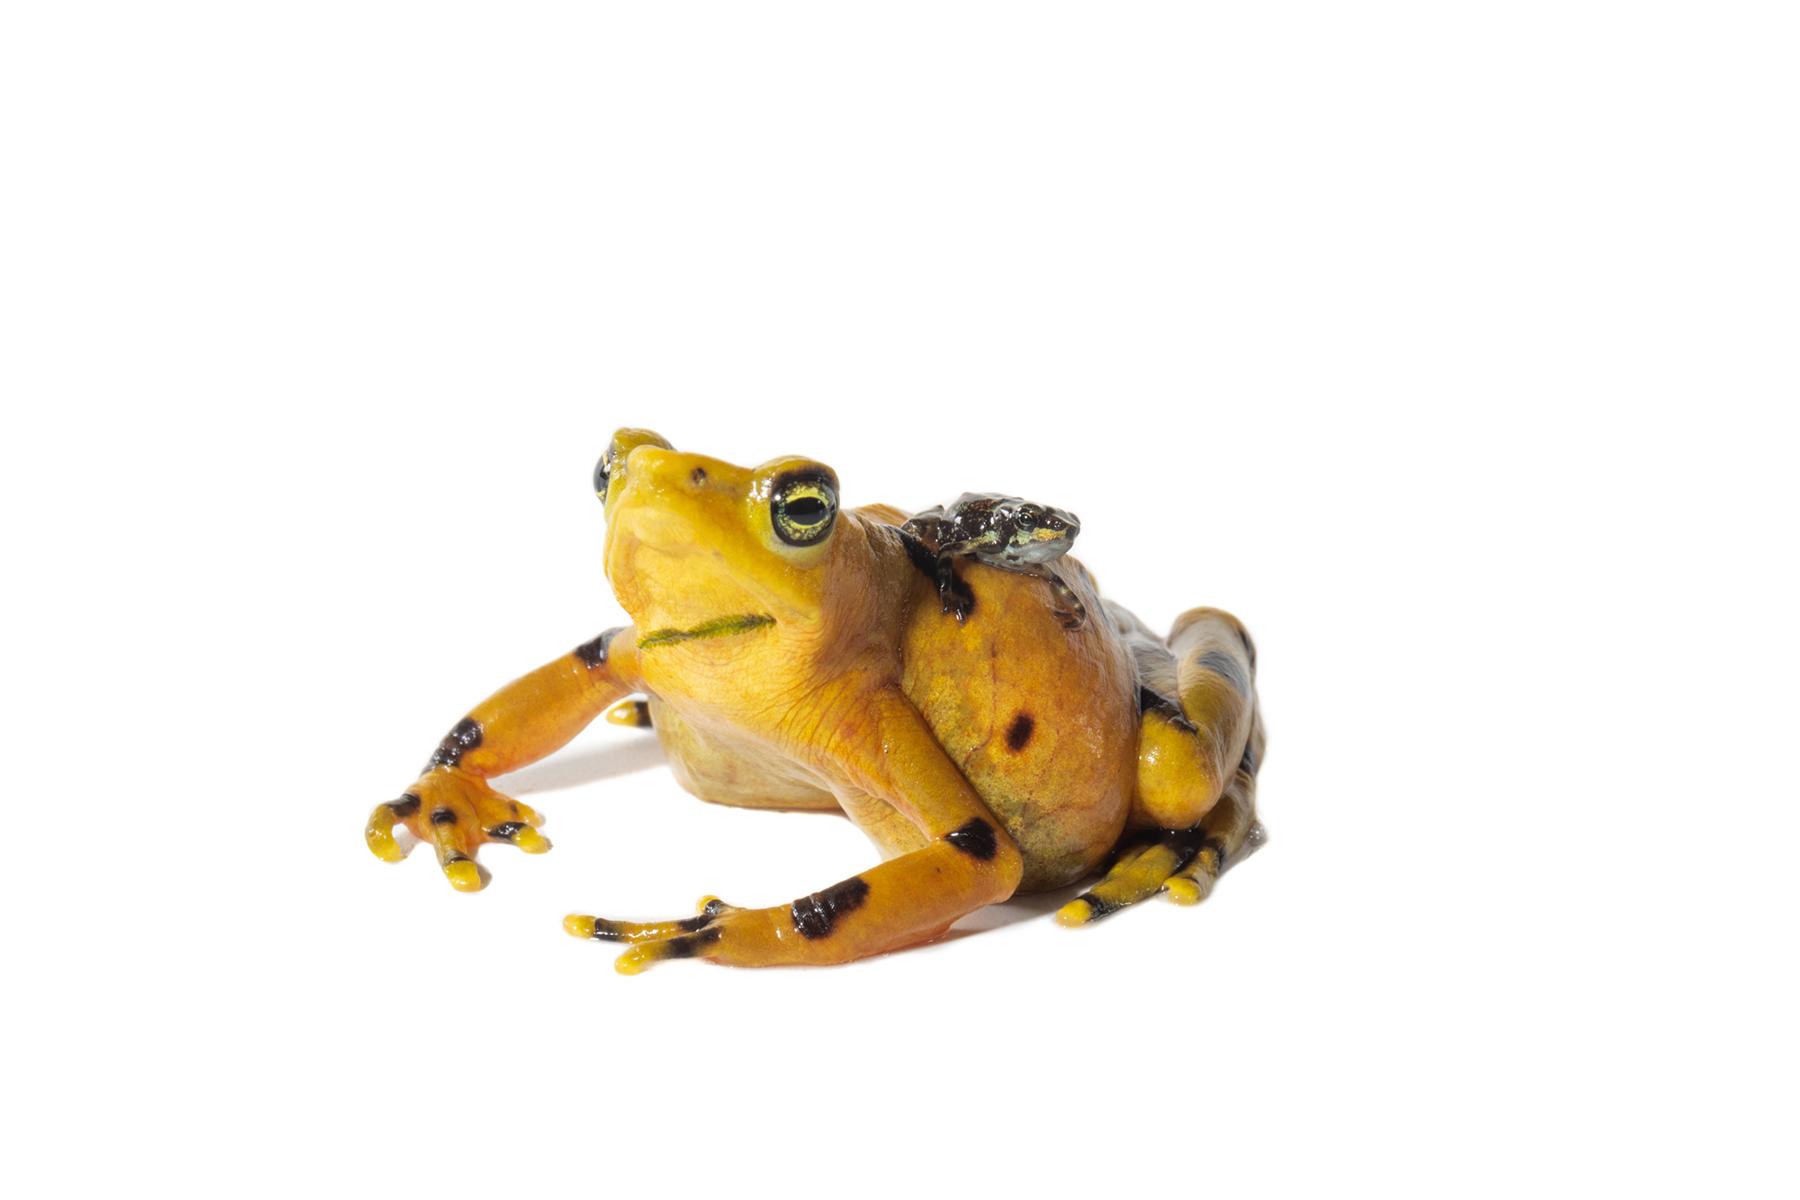 From Tadpoles to Toadlets: Meet Our Panamanian Golden Frog